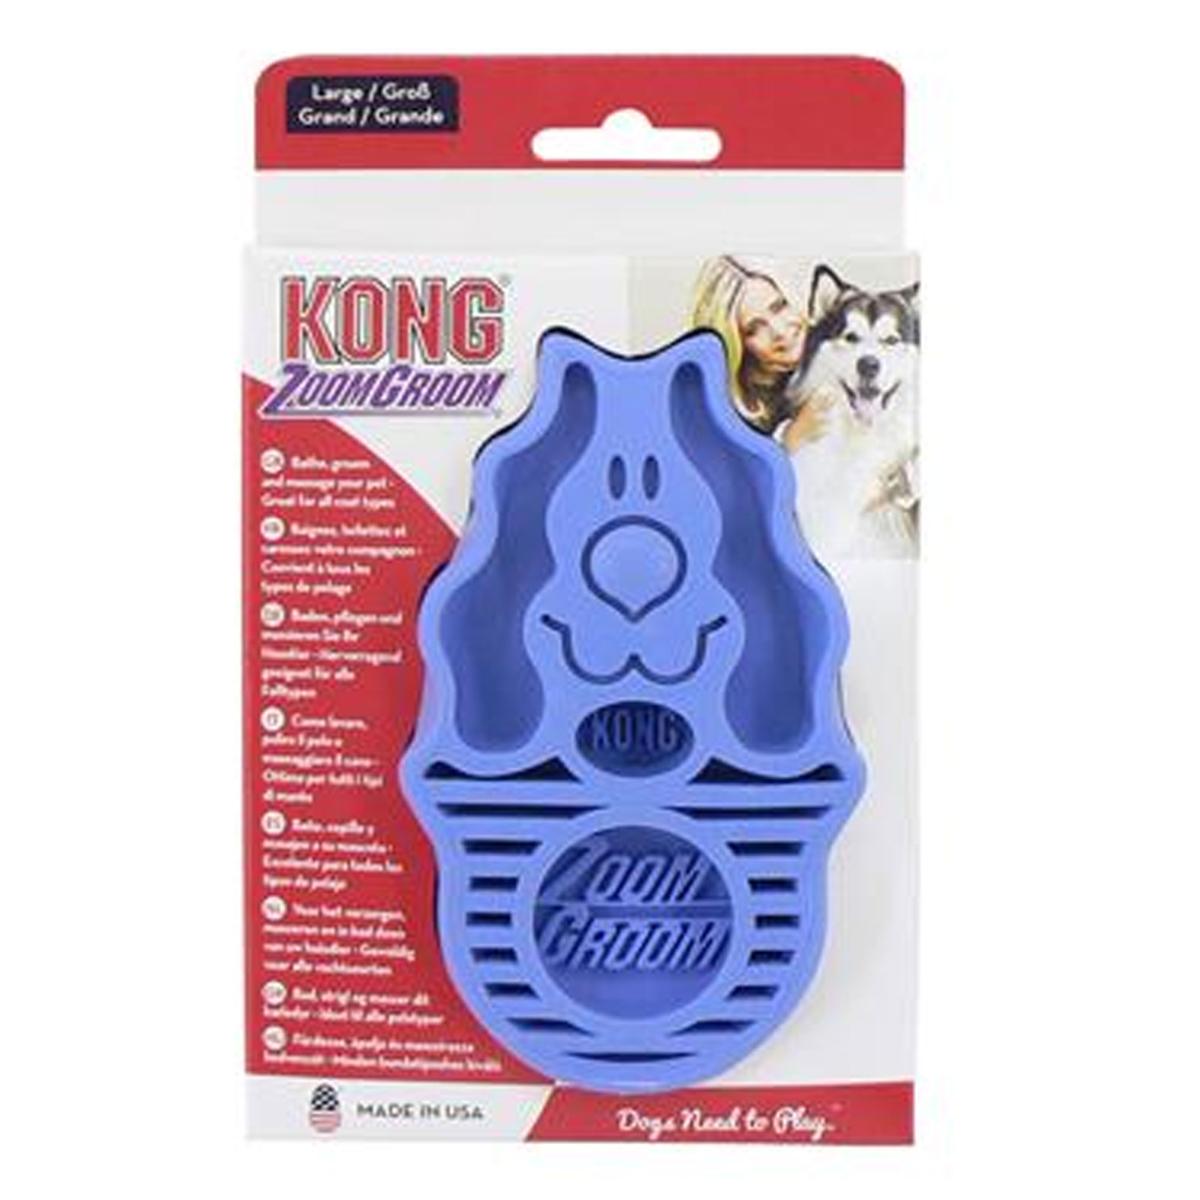 KONG Zoom Groom For Dogs Firm